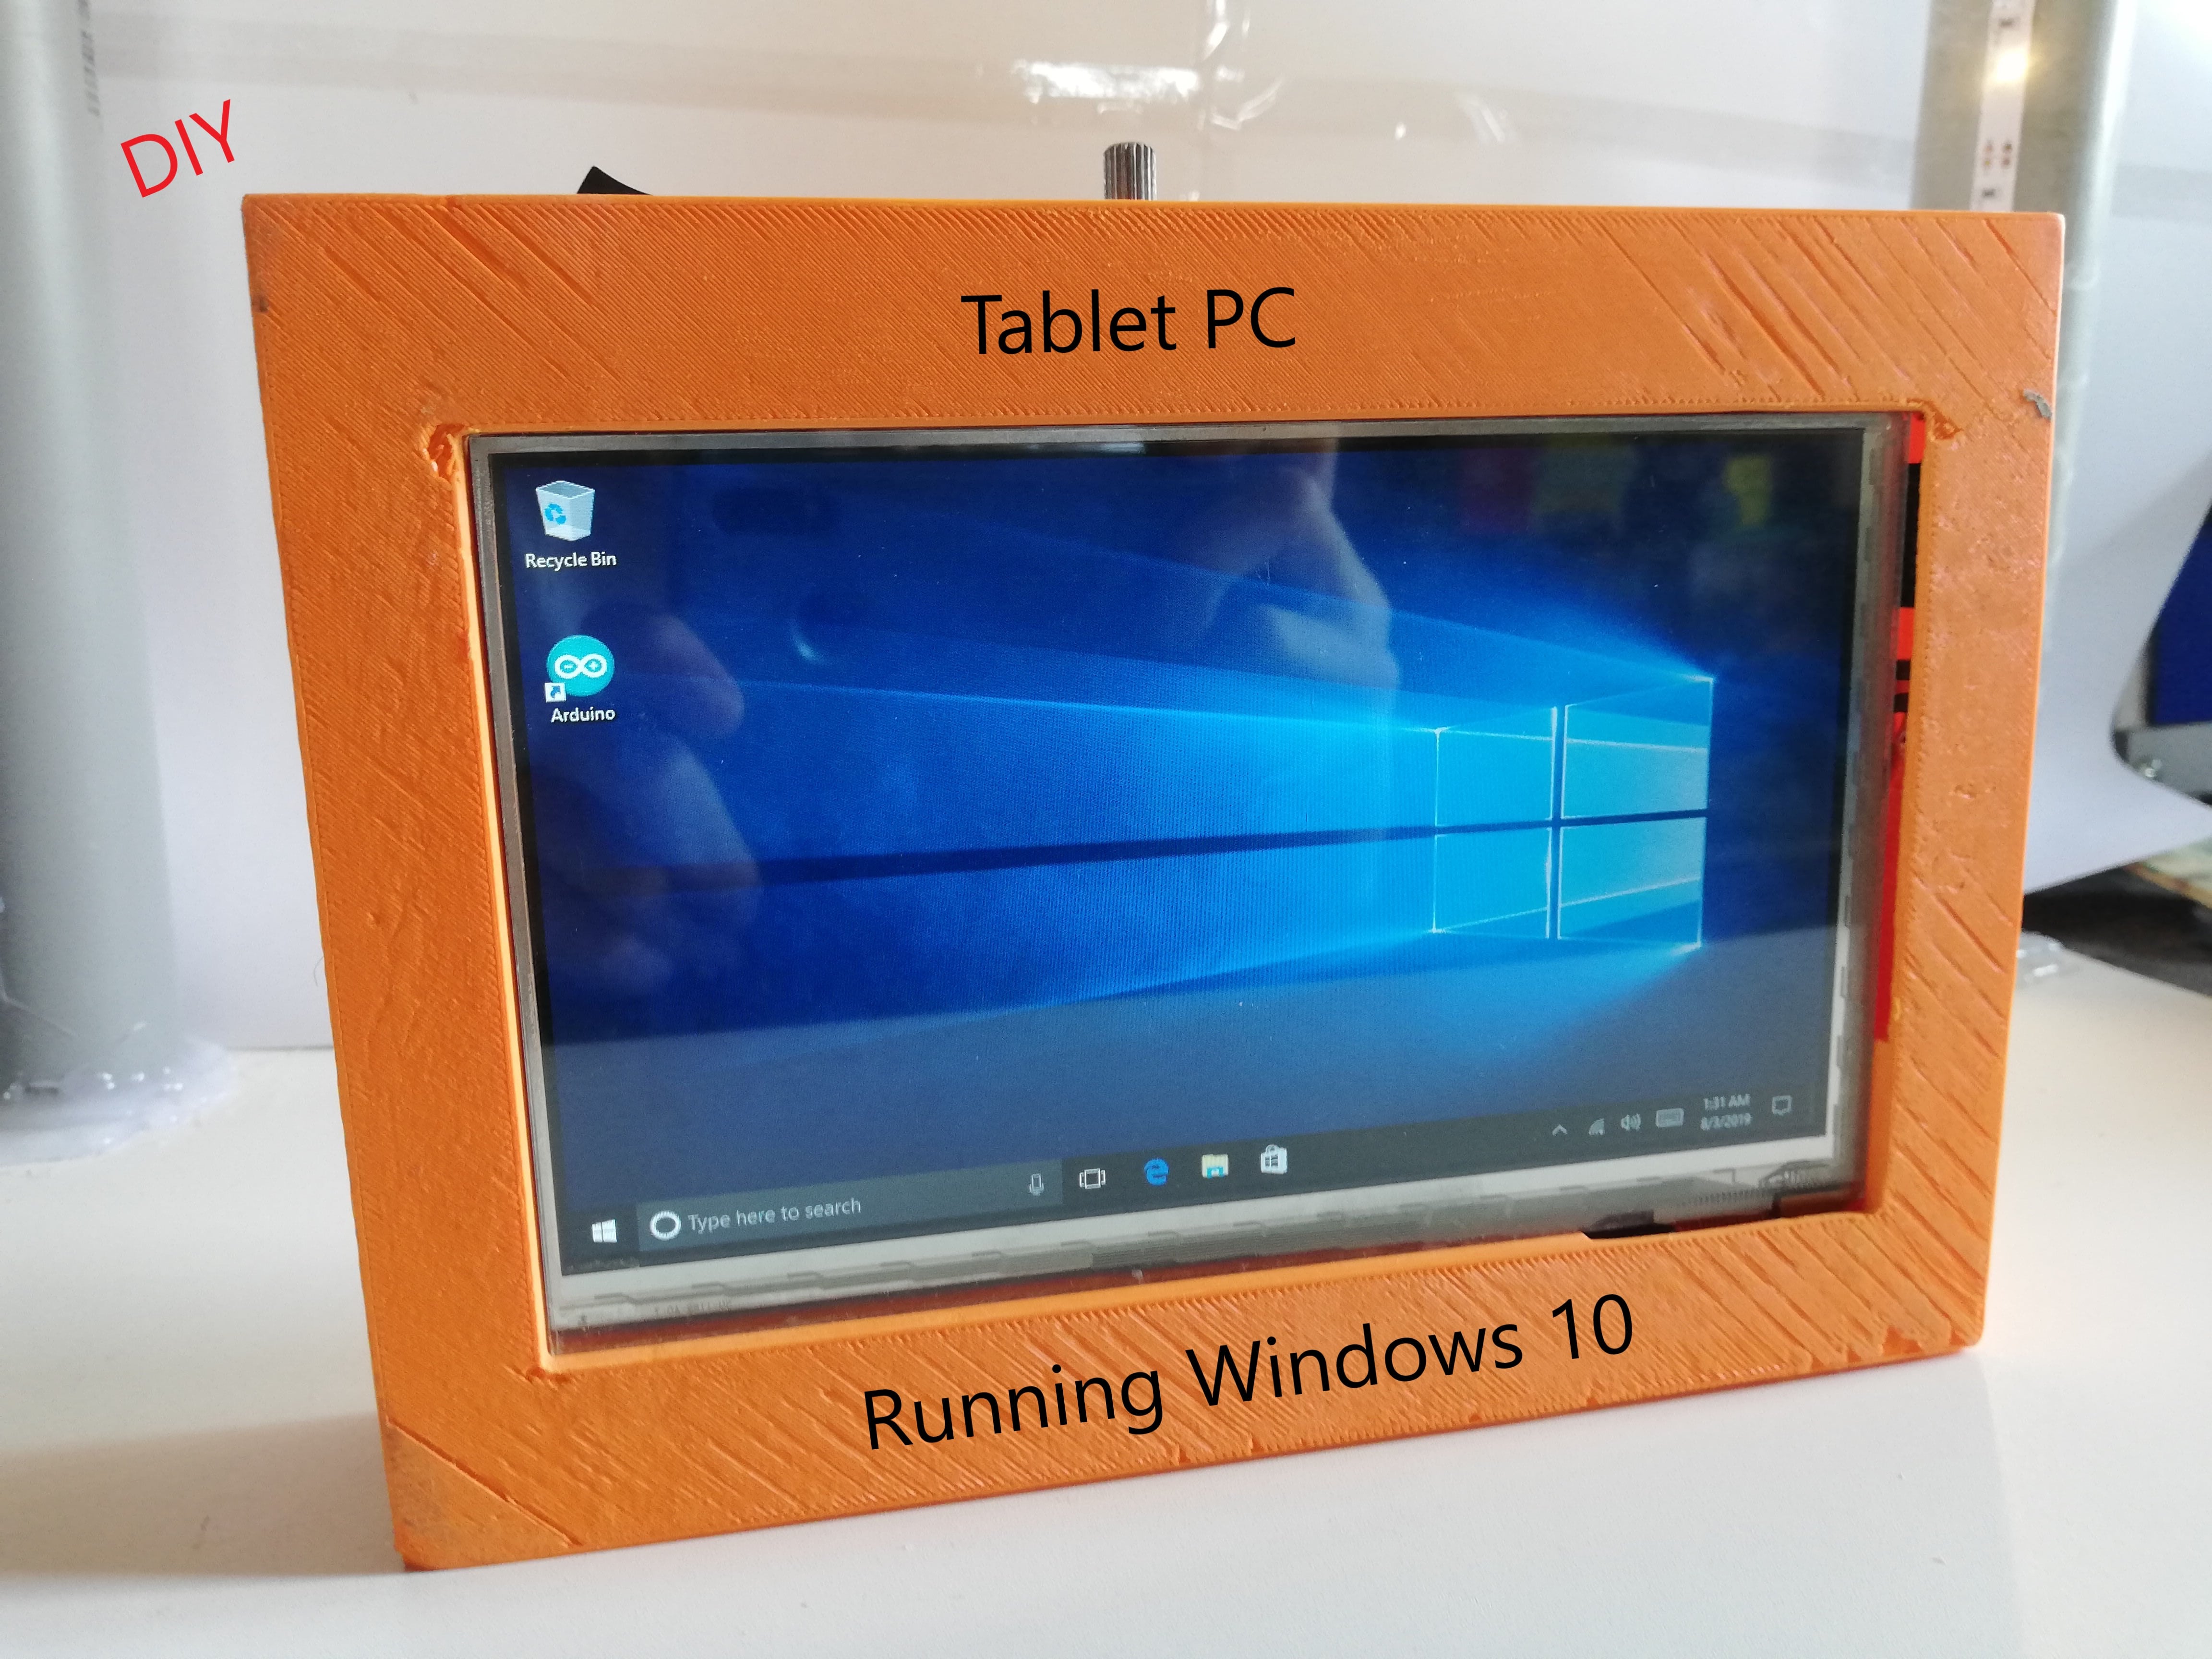 install tablet pc components windows 7 embedded